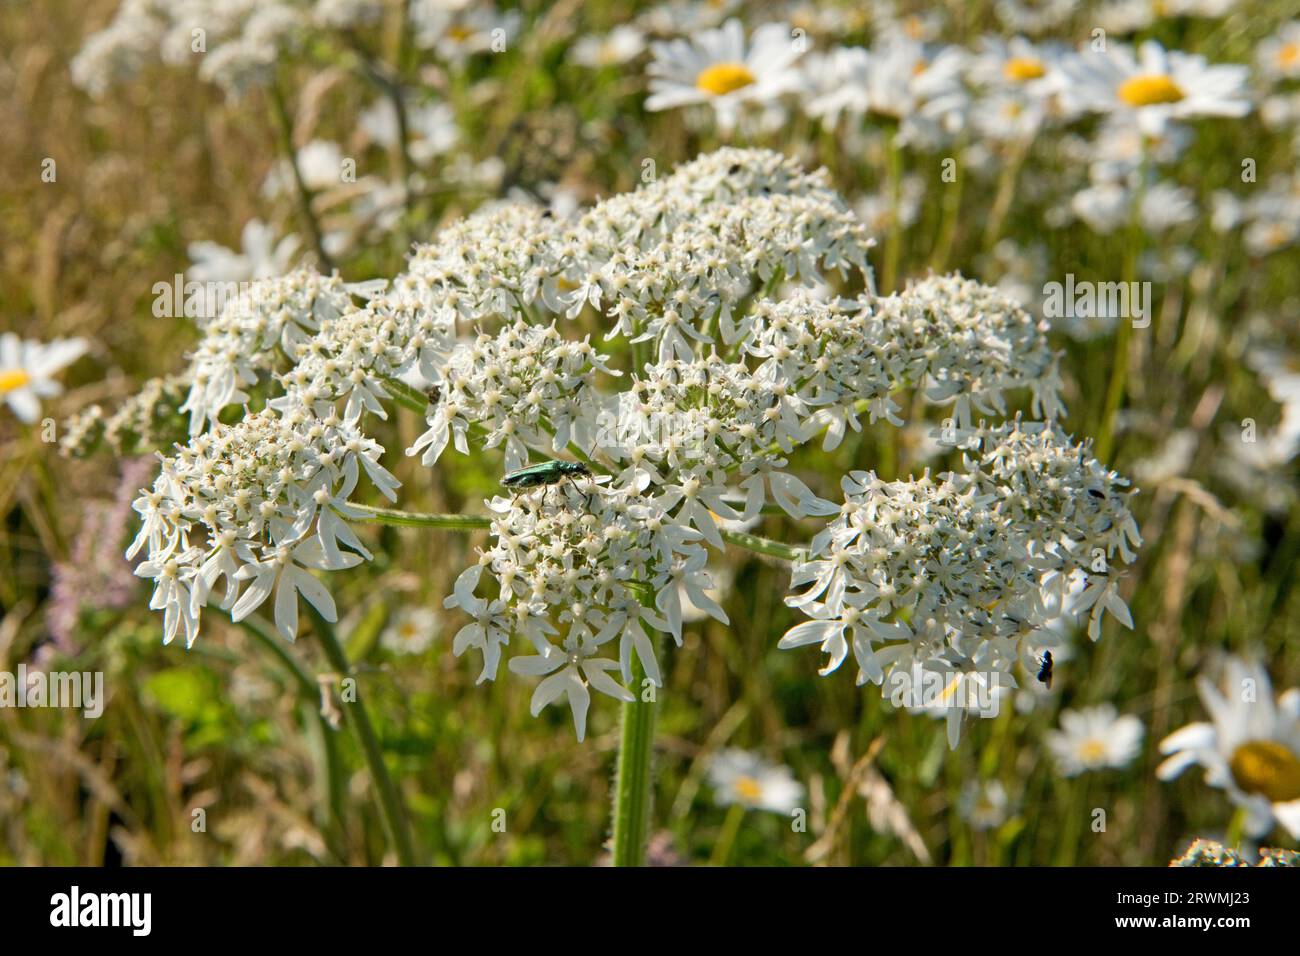 Hogweed or common hogweed (Heracleum sphondylium), Apiaceae, white flowering umbel attractive to many pollinators in gardens and hedgerows, Berkshire, Stock Photo